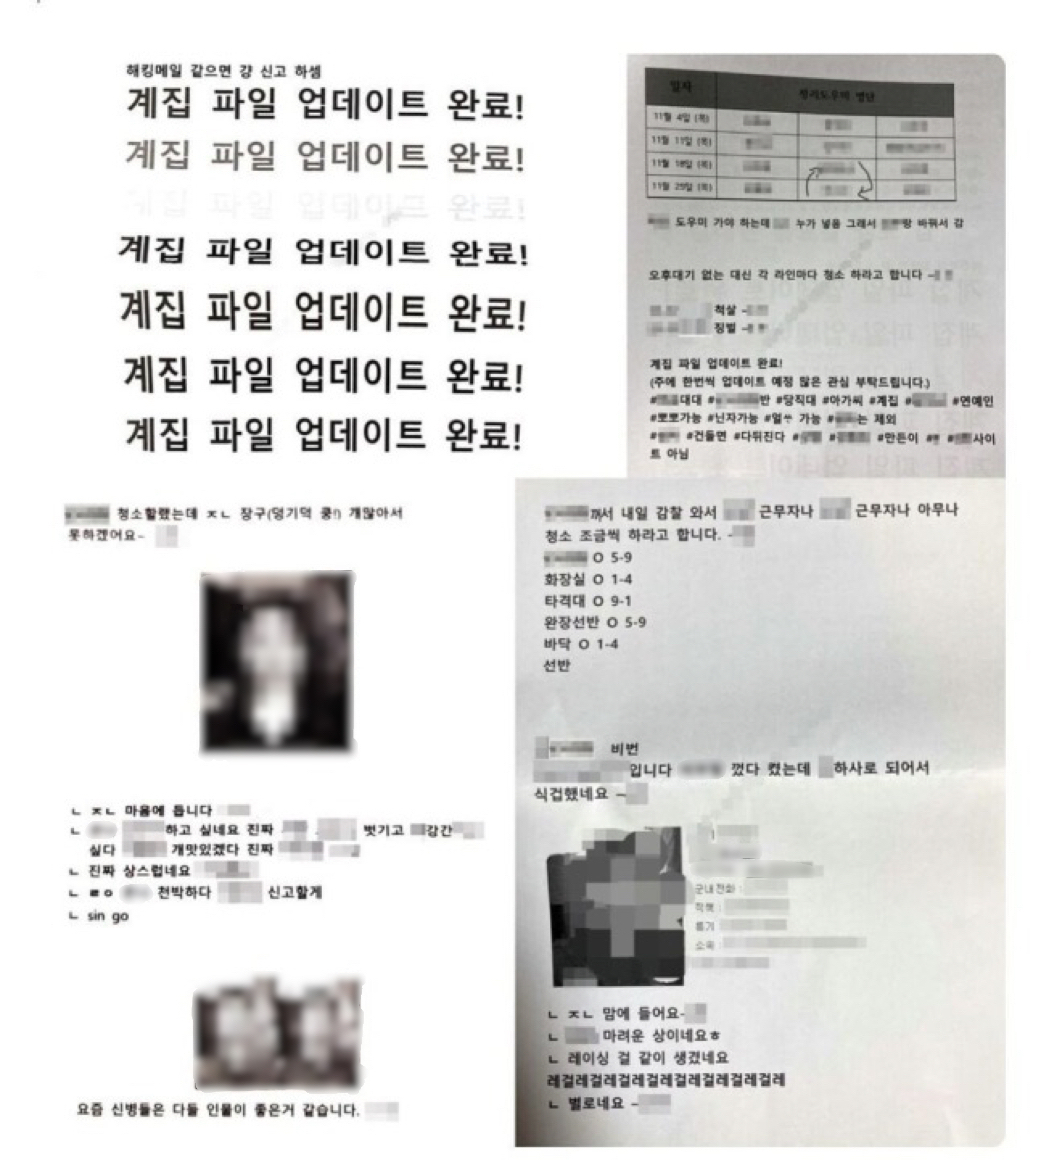 This file photo shows sexually inappropriate comments allegedly written by former Air Force soldiers against female superiors. (Screenshot captured from The Hankyoreh’s official website)